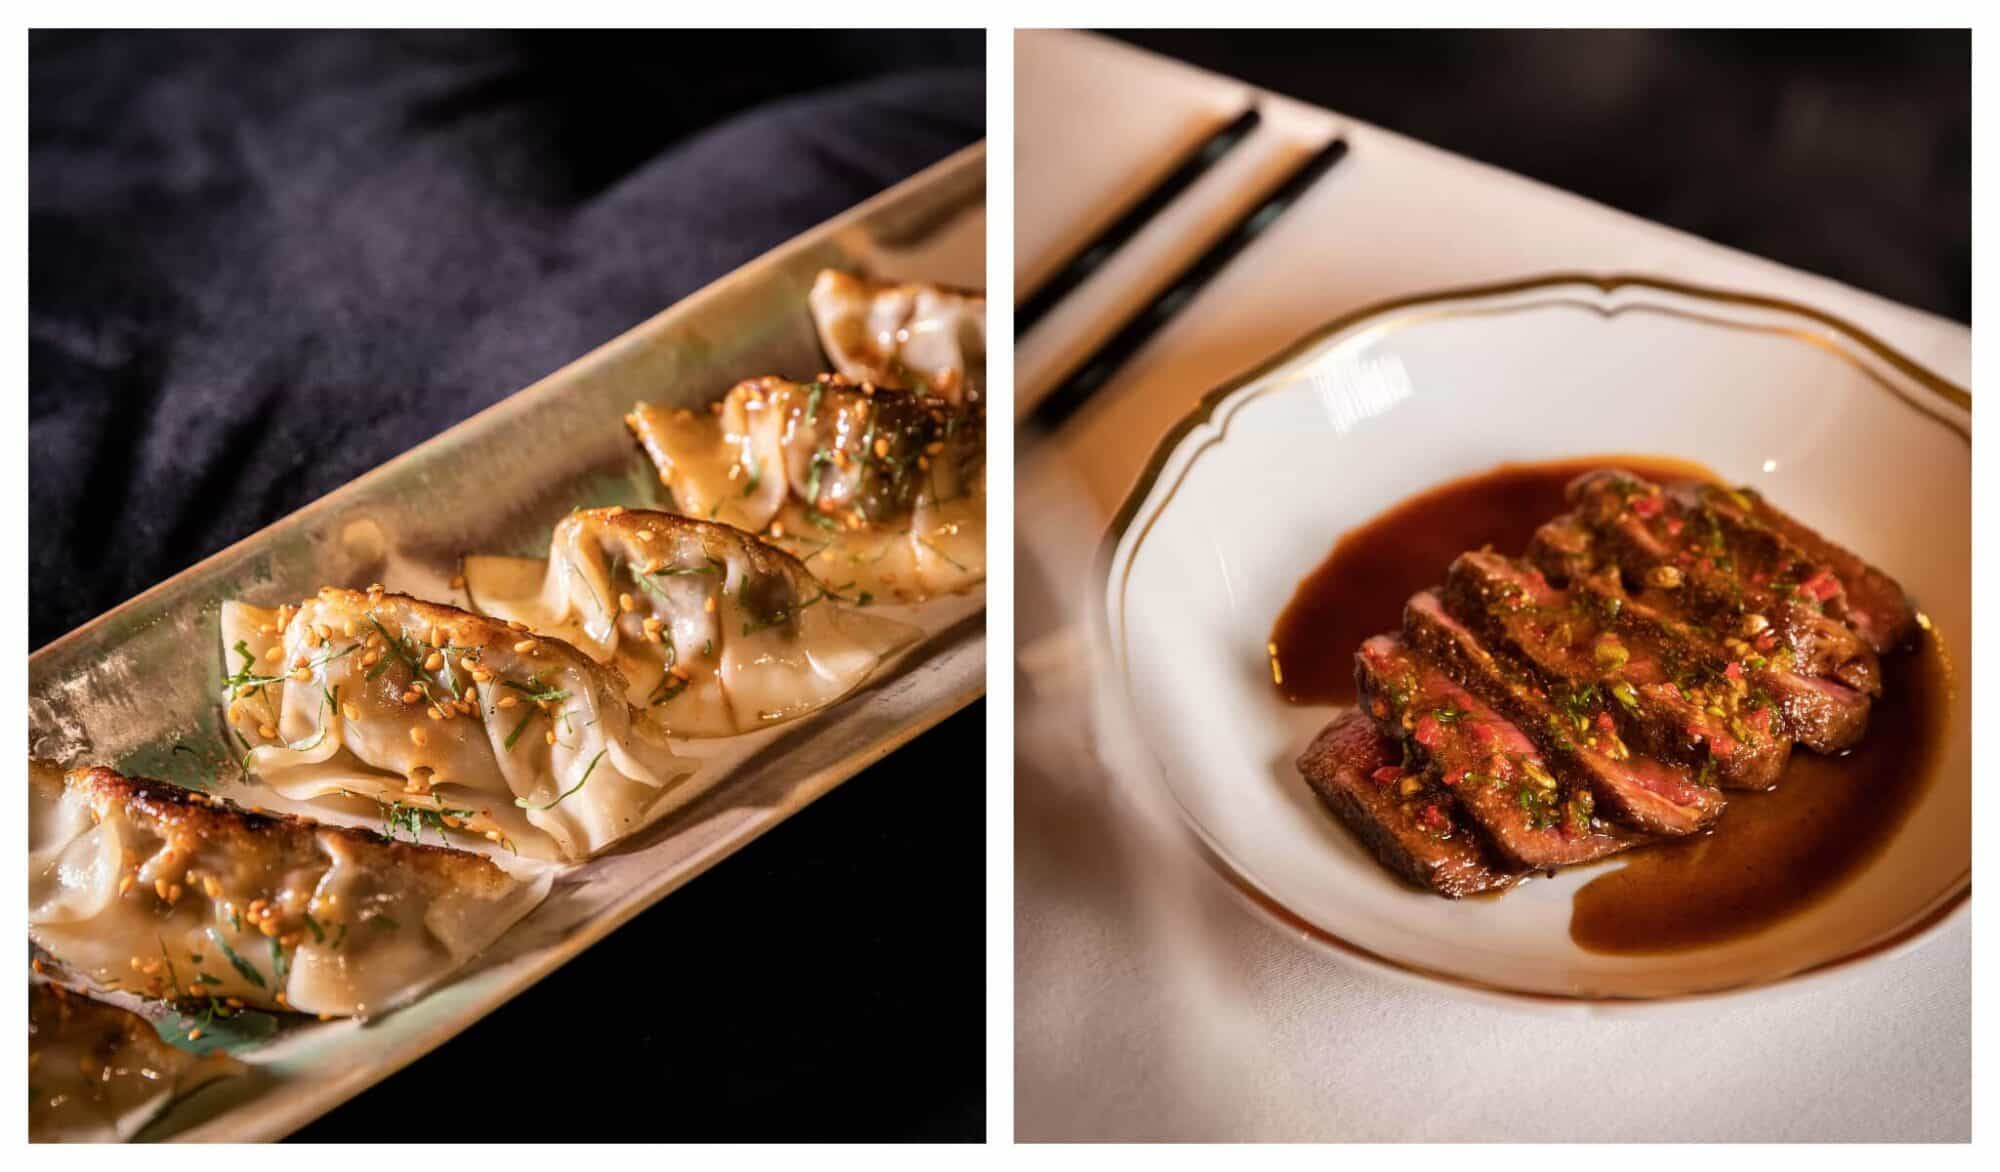 Left: Dragon's gyoza dish; Right: Dragon's beef plate with soy sauce and herbs.